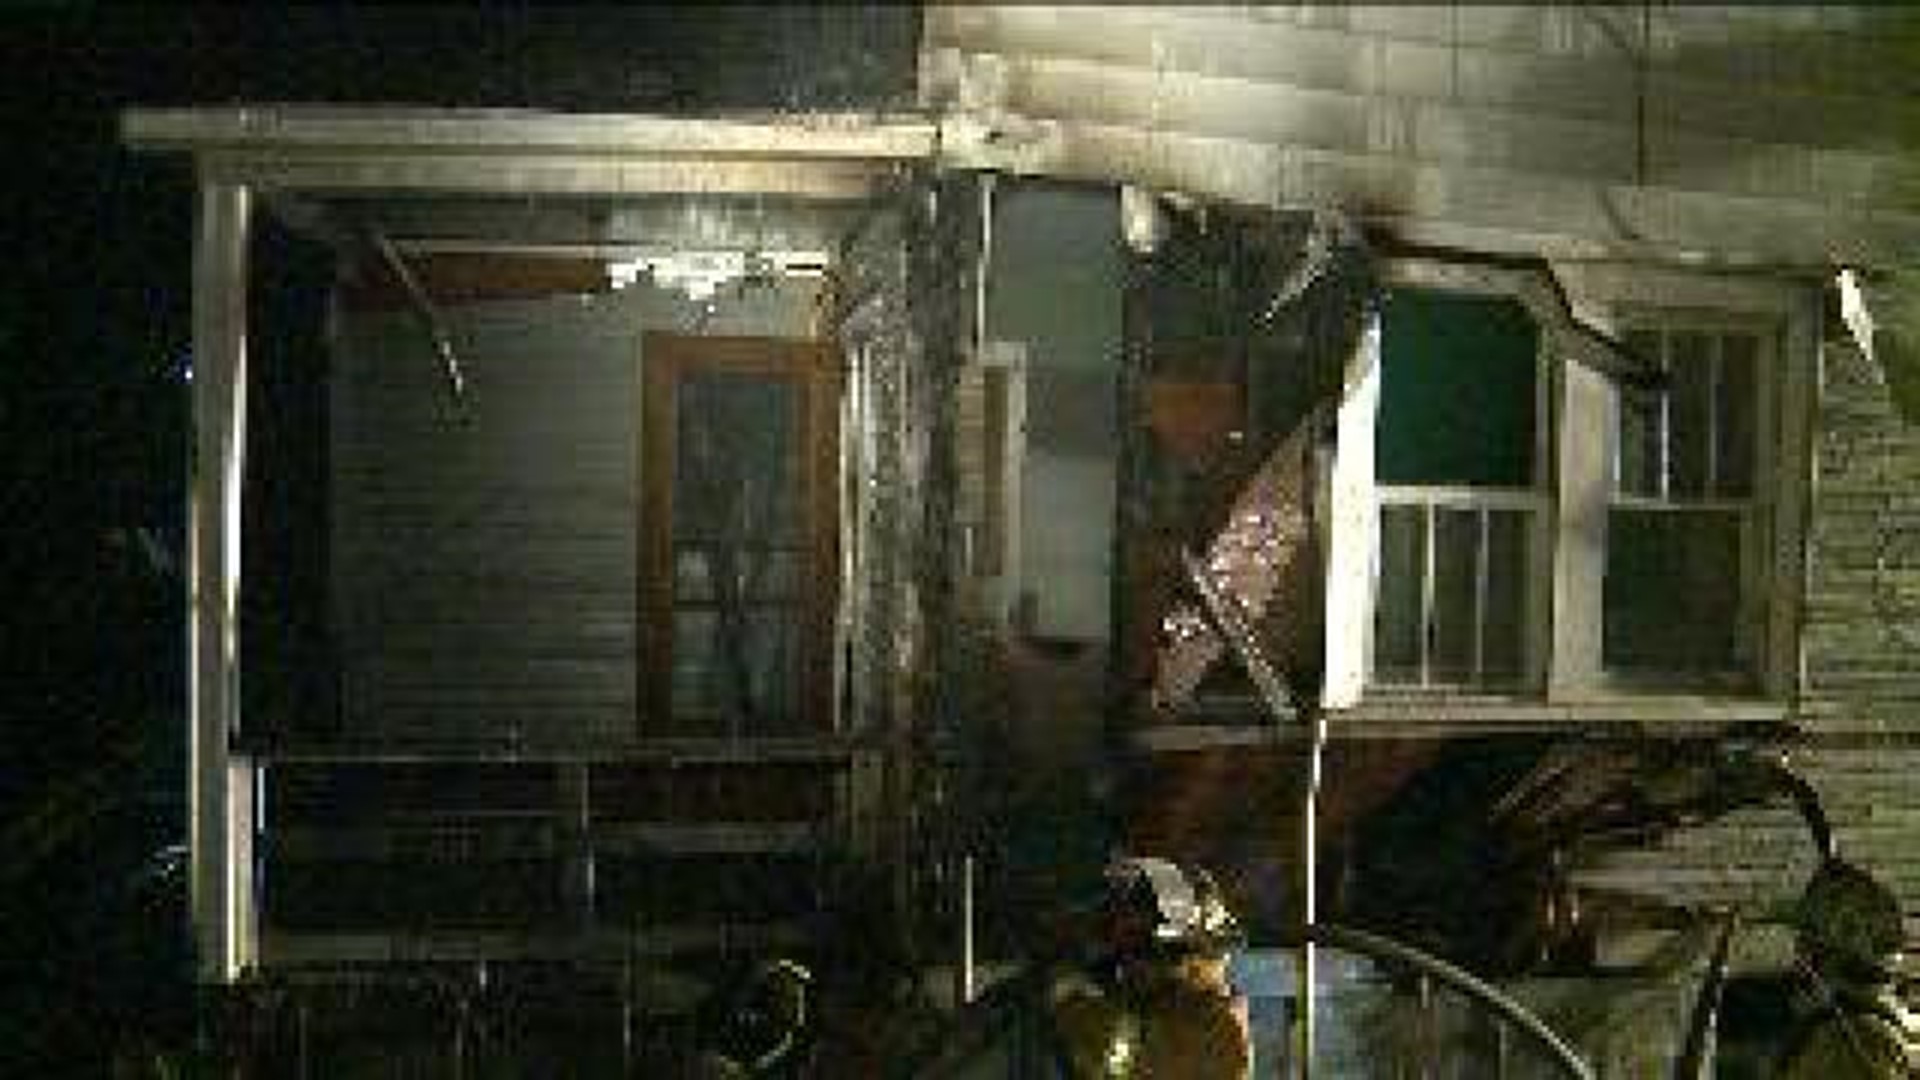 Crews Label Early Morning Fire 'Suspicious'